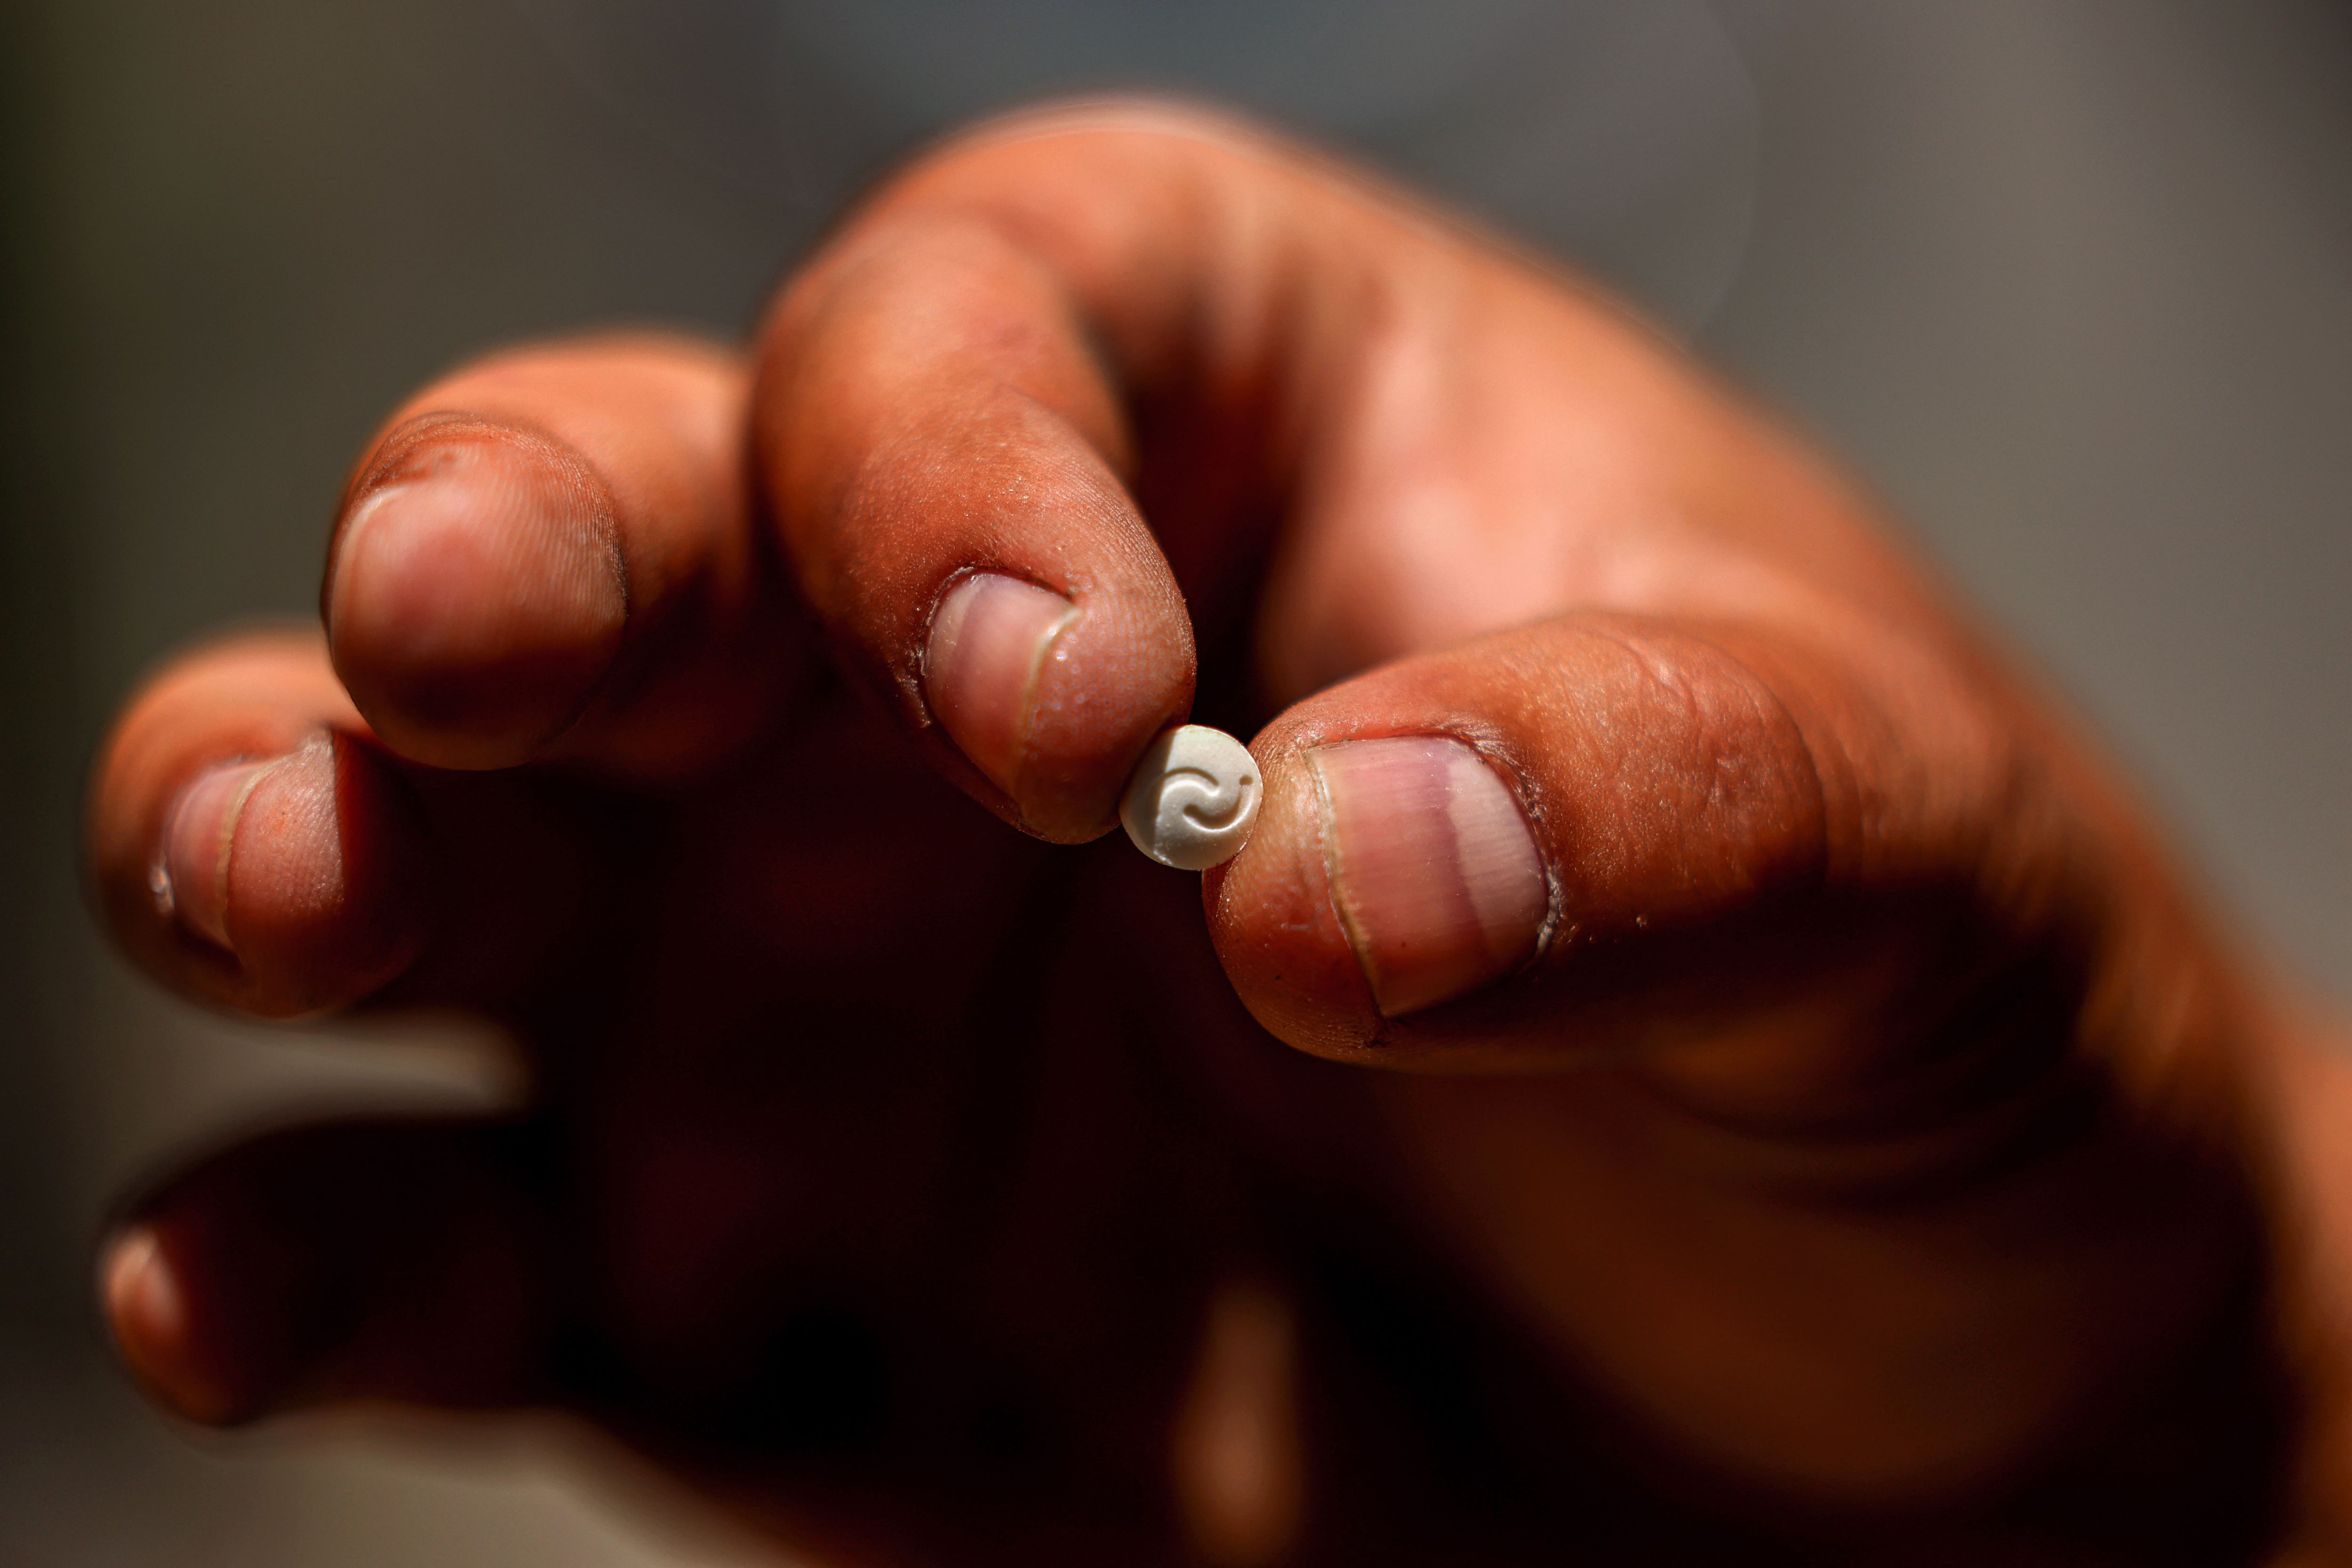 A Lebanese security official holds a single confiscated captagon pill in his hand at the judicial police headquarters in the city of Zahle in Lebanon's central Bekaa valley on July 21, 2022 (AFP)